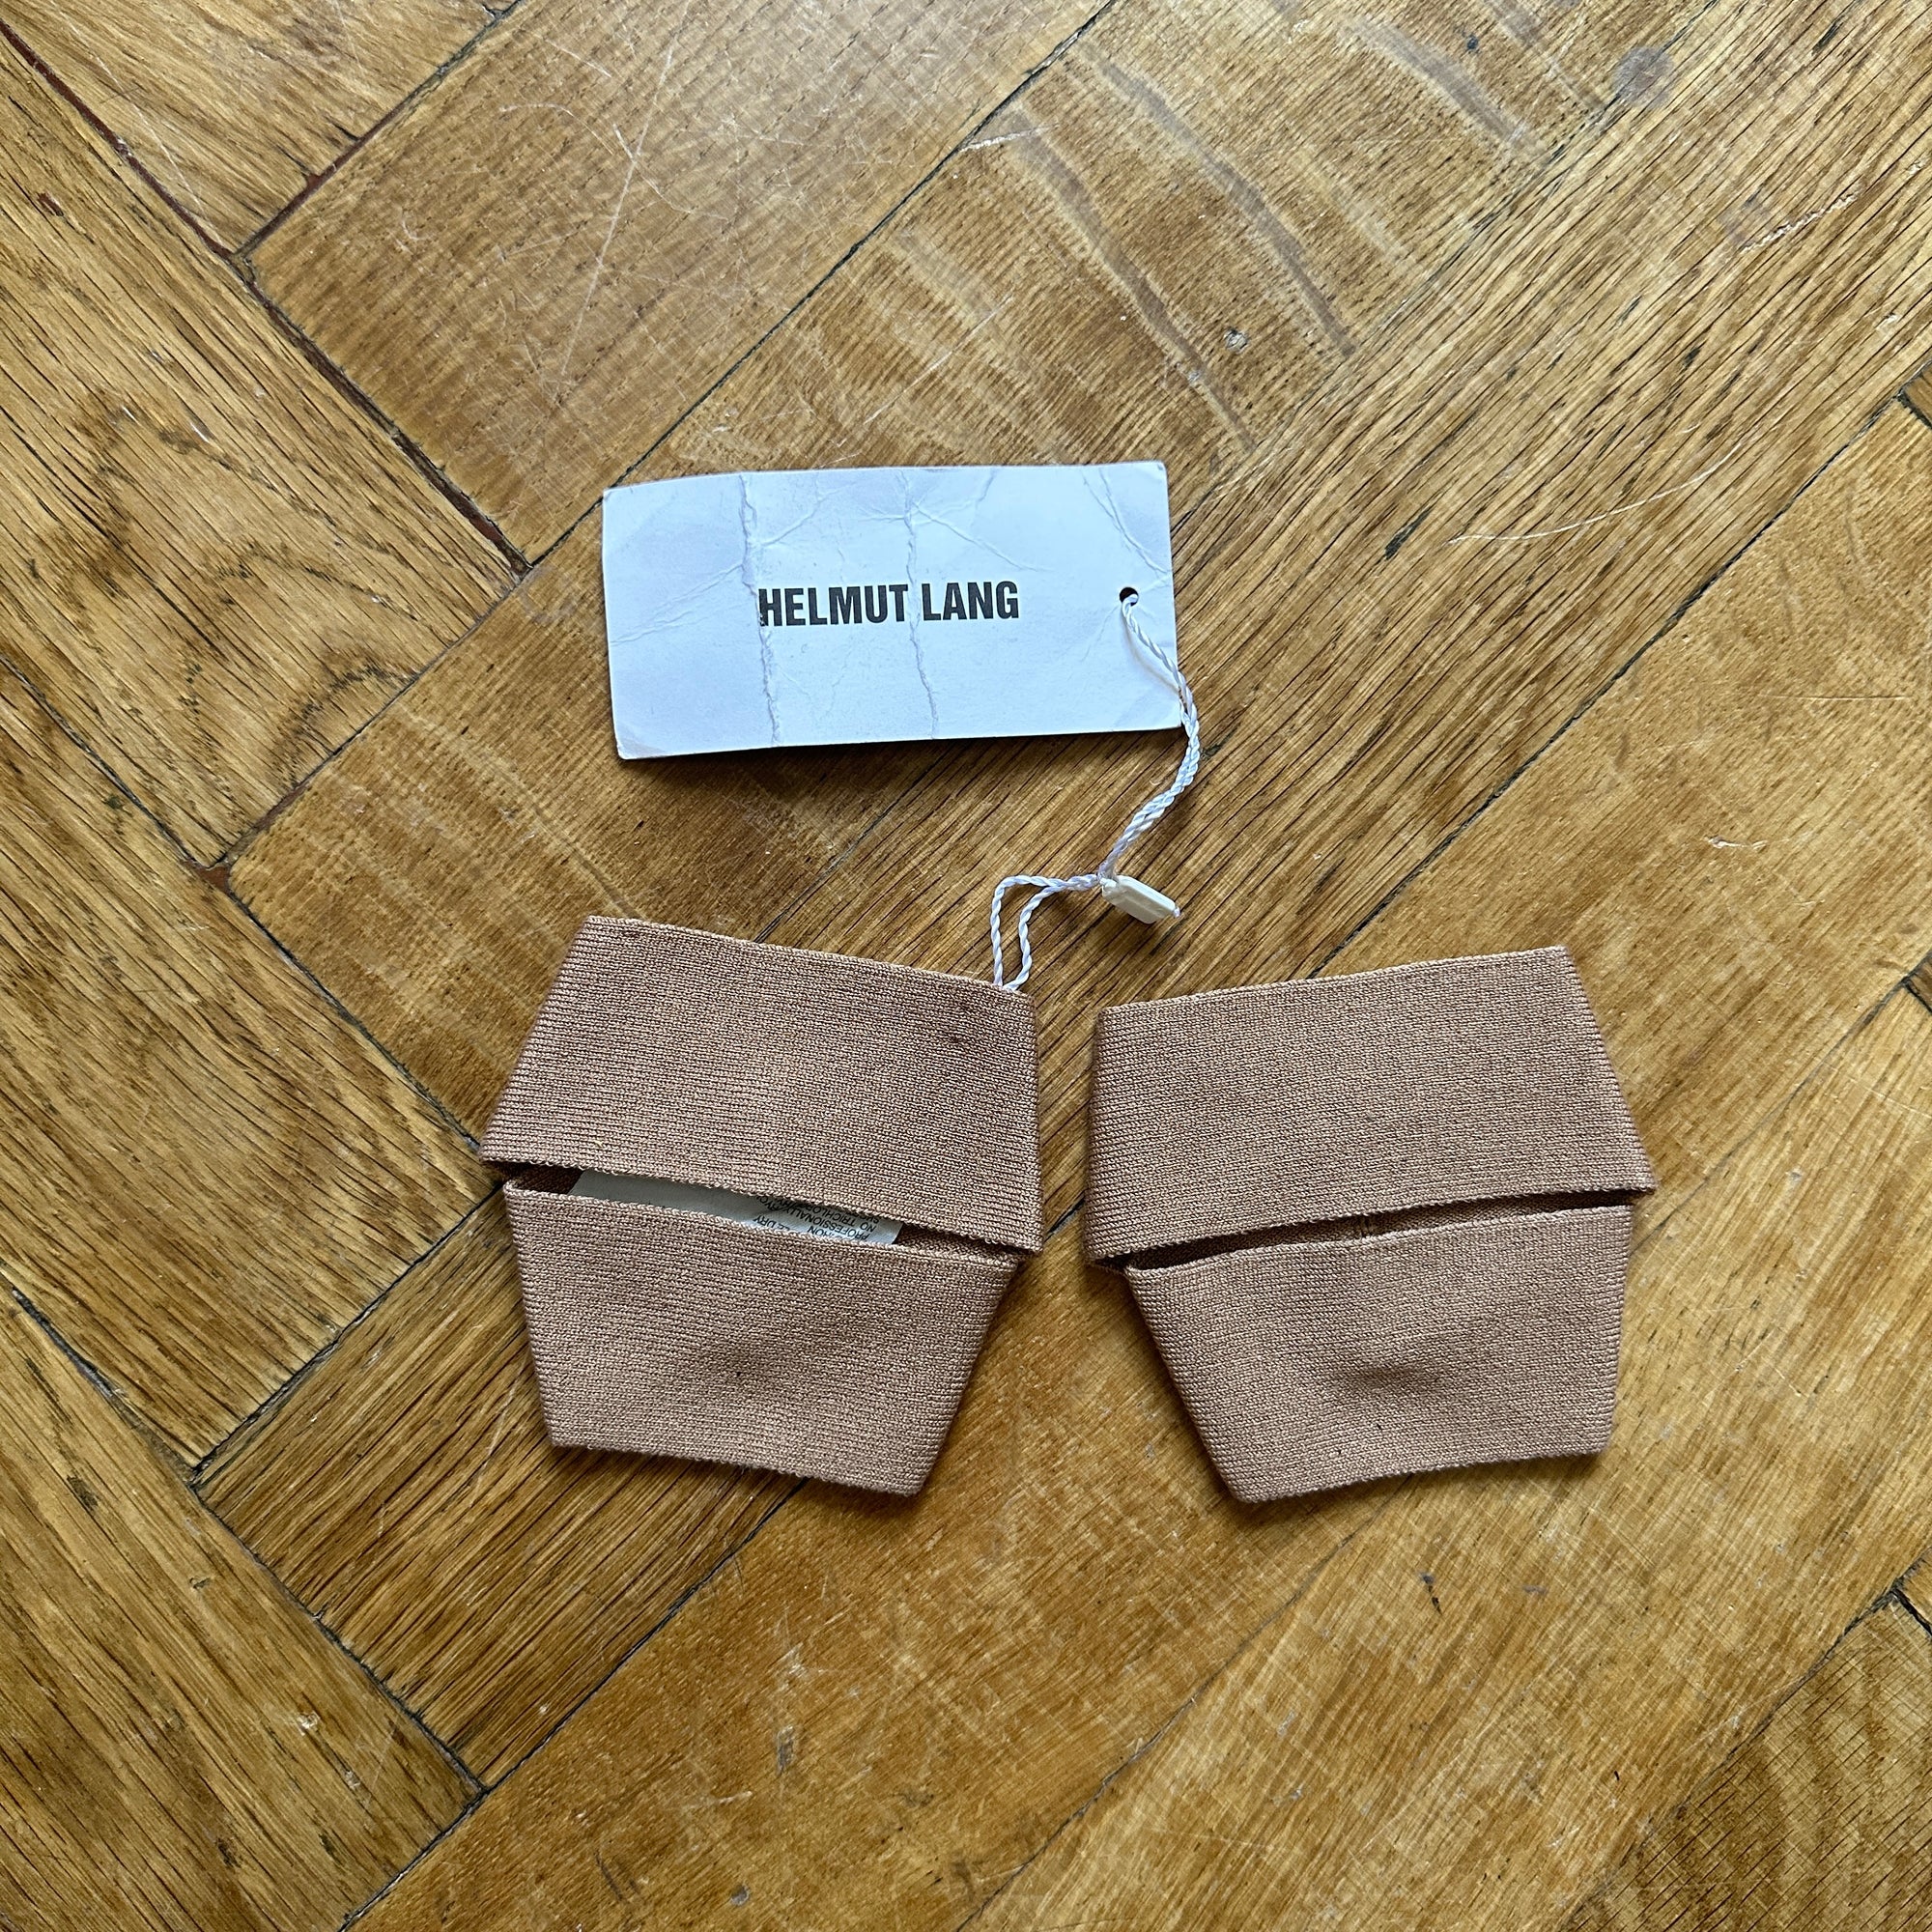 Helmut Lang SS04 Nude Hand Wrap Mittens